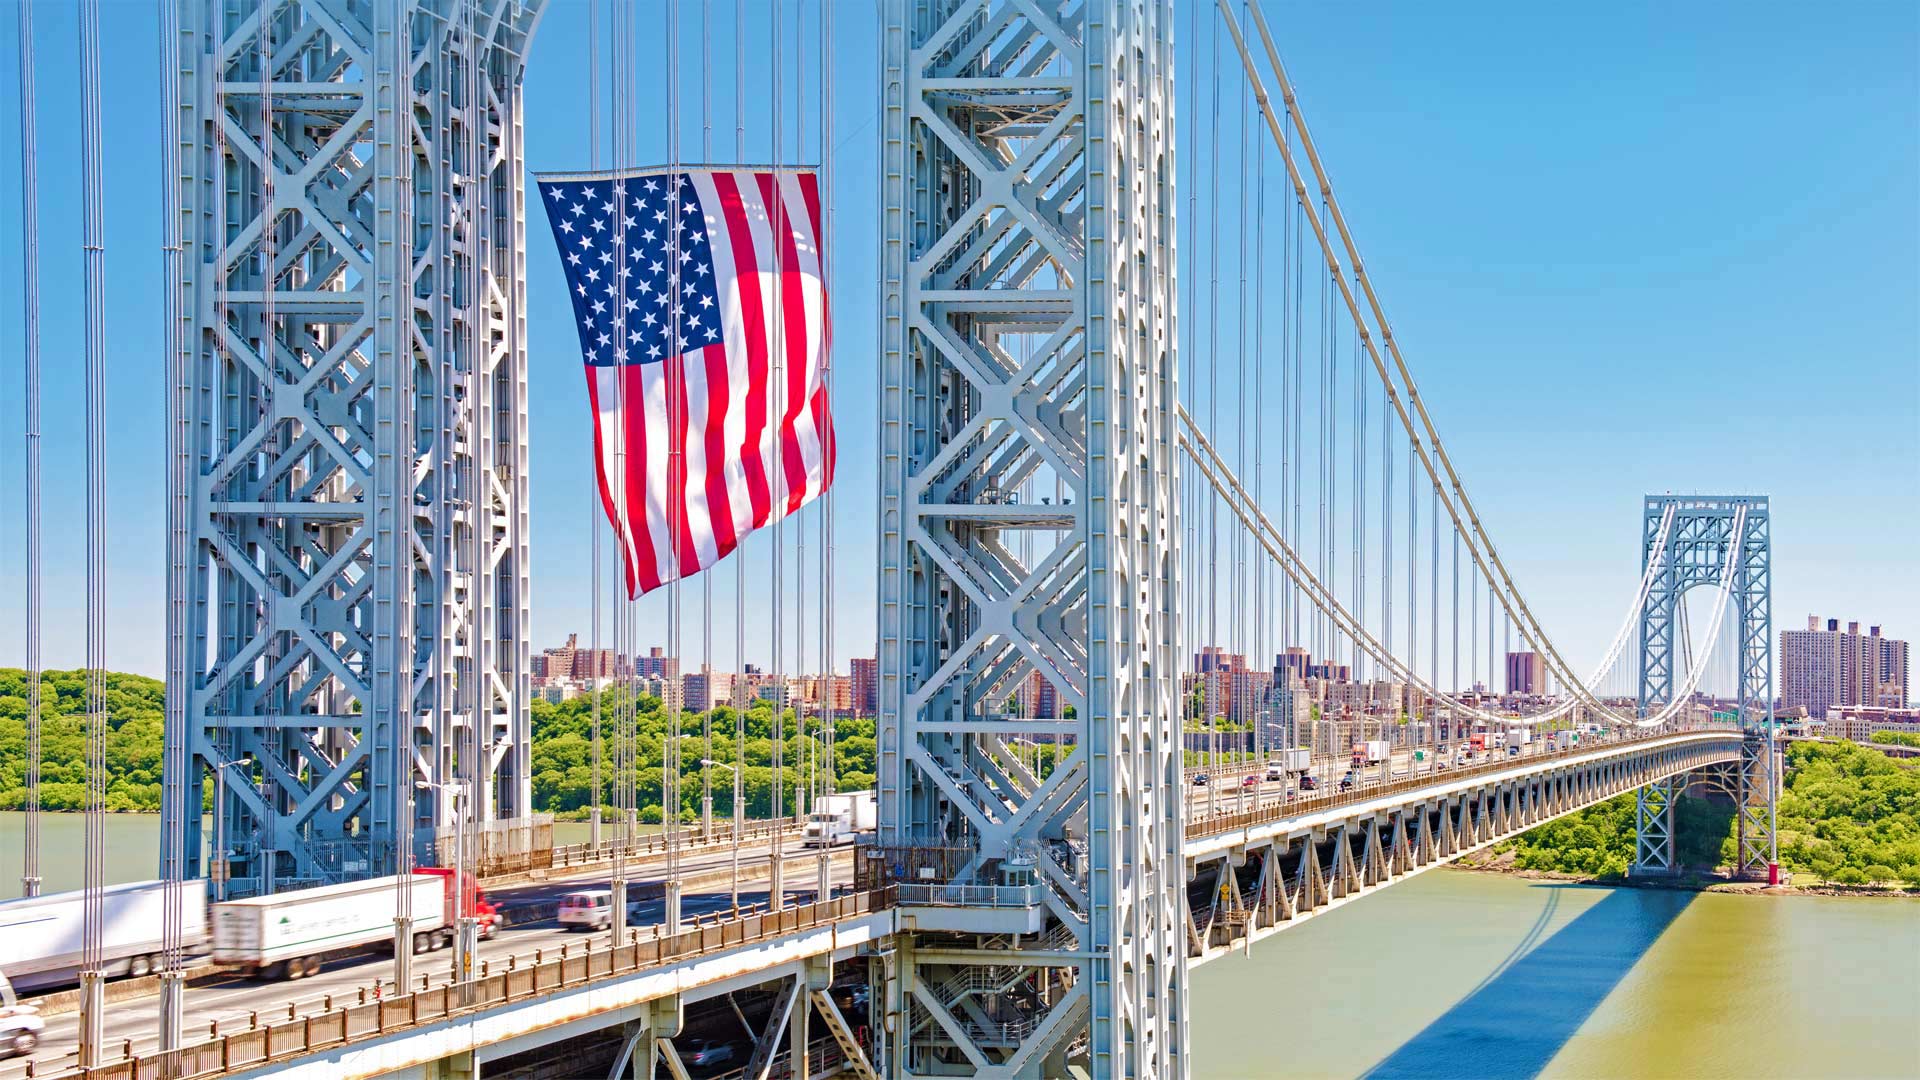 The George Washington Bridge displays the American flag in honor of Flag Day, June 14, 2016, Fort Lee, New Jersey - Robert D. Barnes/Getty Images)